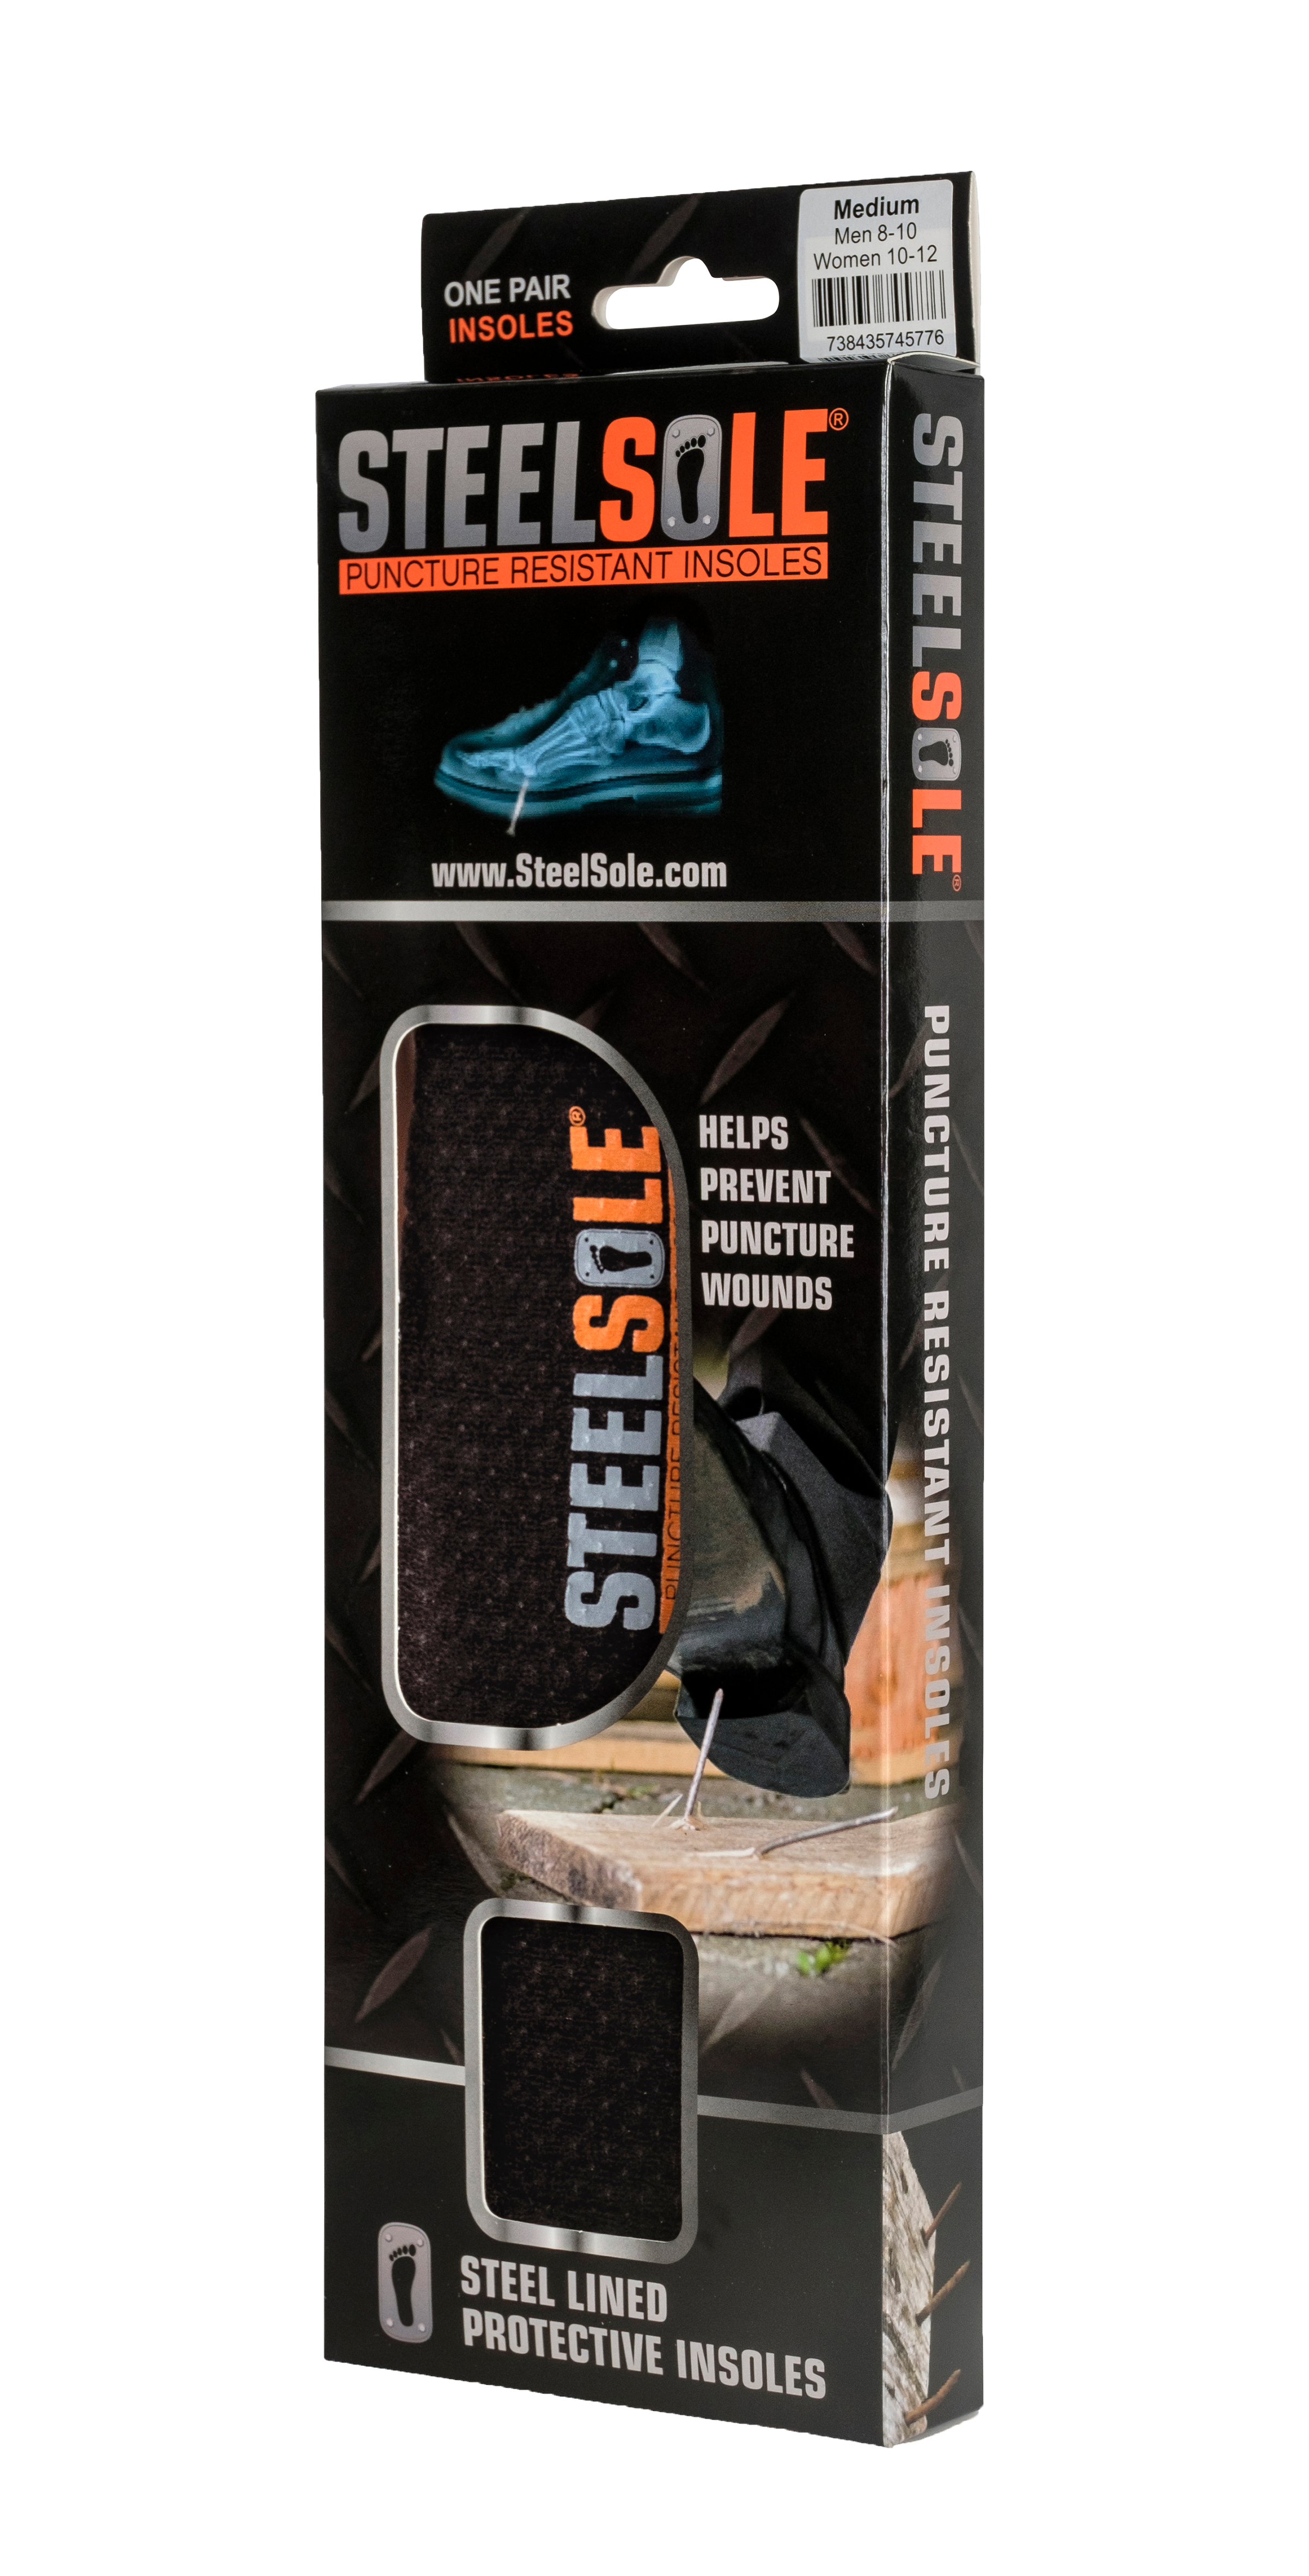 SteelSole Buy New Today! Steel Sole Puncture Resistant Protective Insoles 